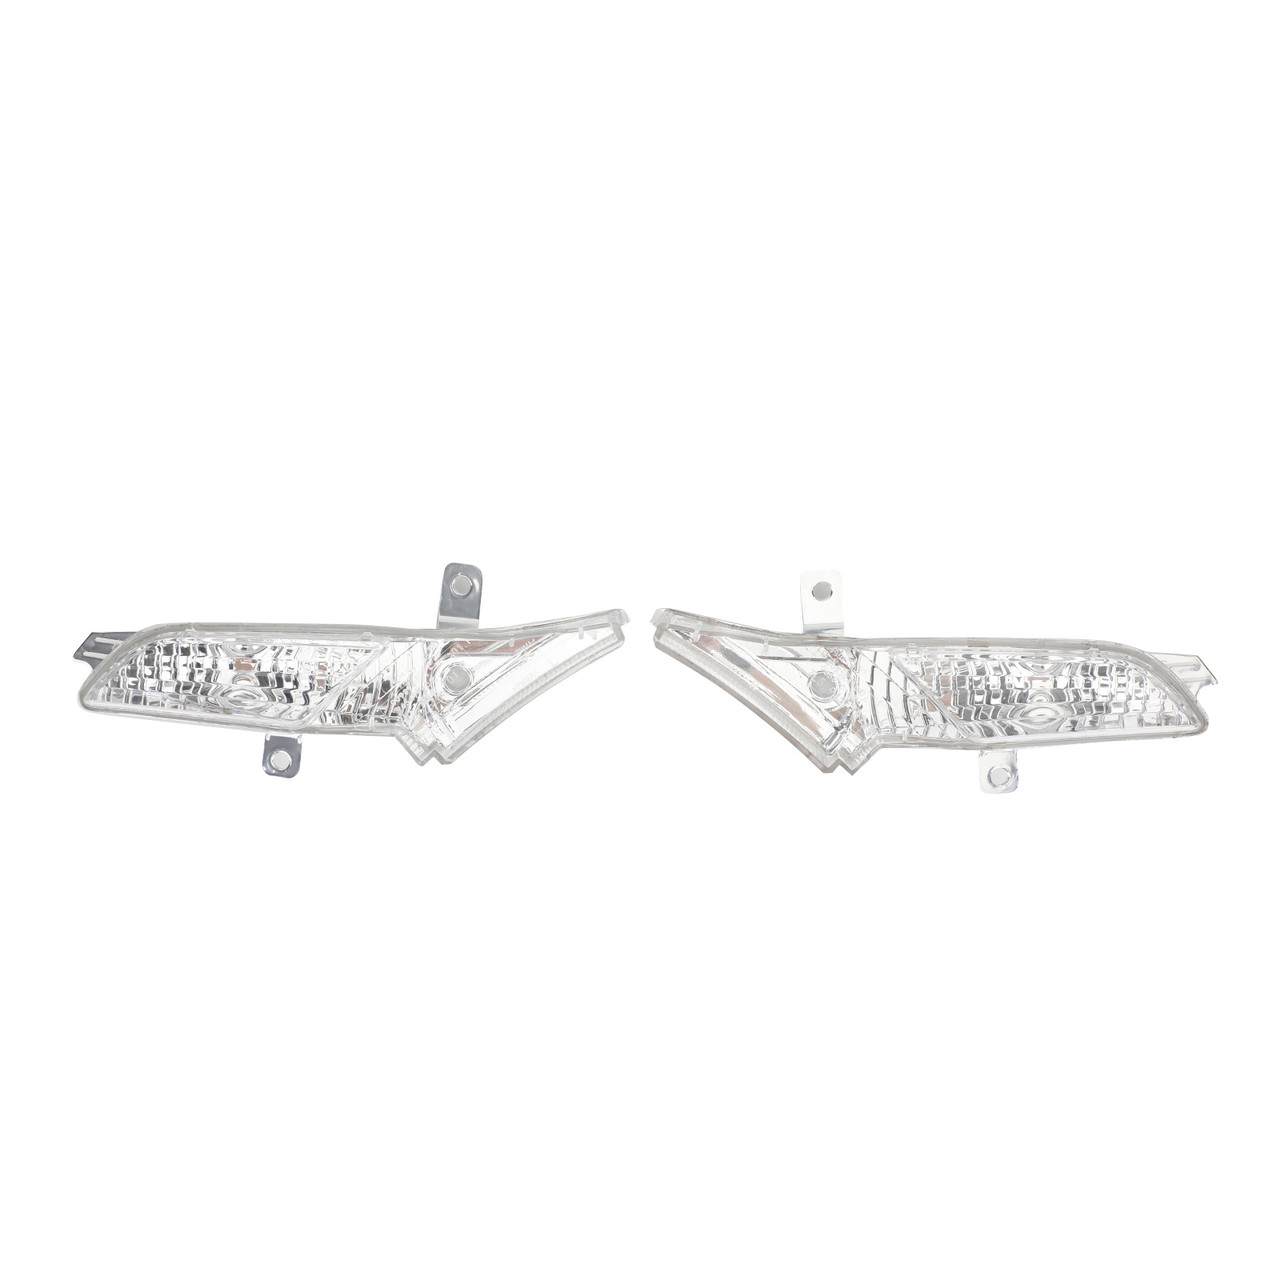 Pair Right+Left Front Side Marker Light Fit For Porsche Cayenne 2008-2010 Clear